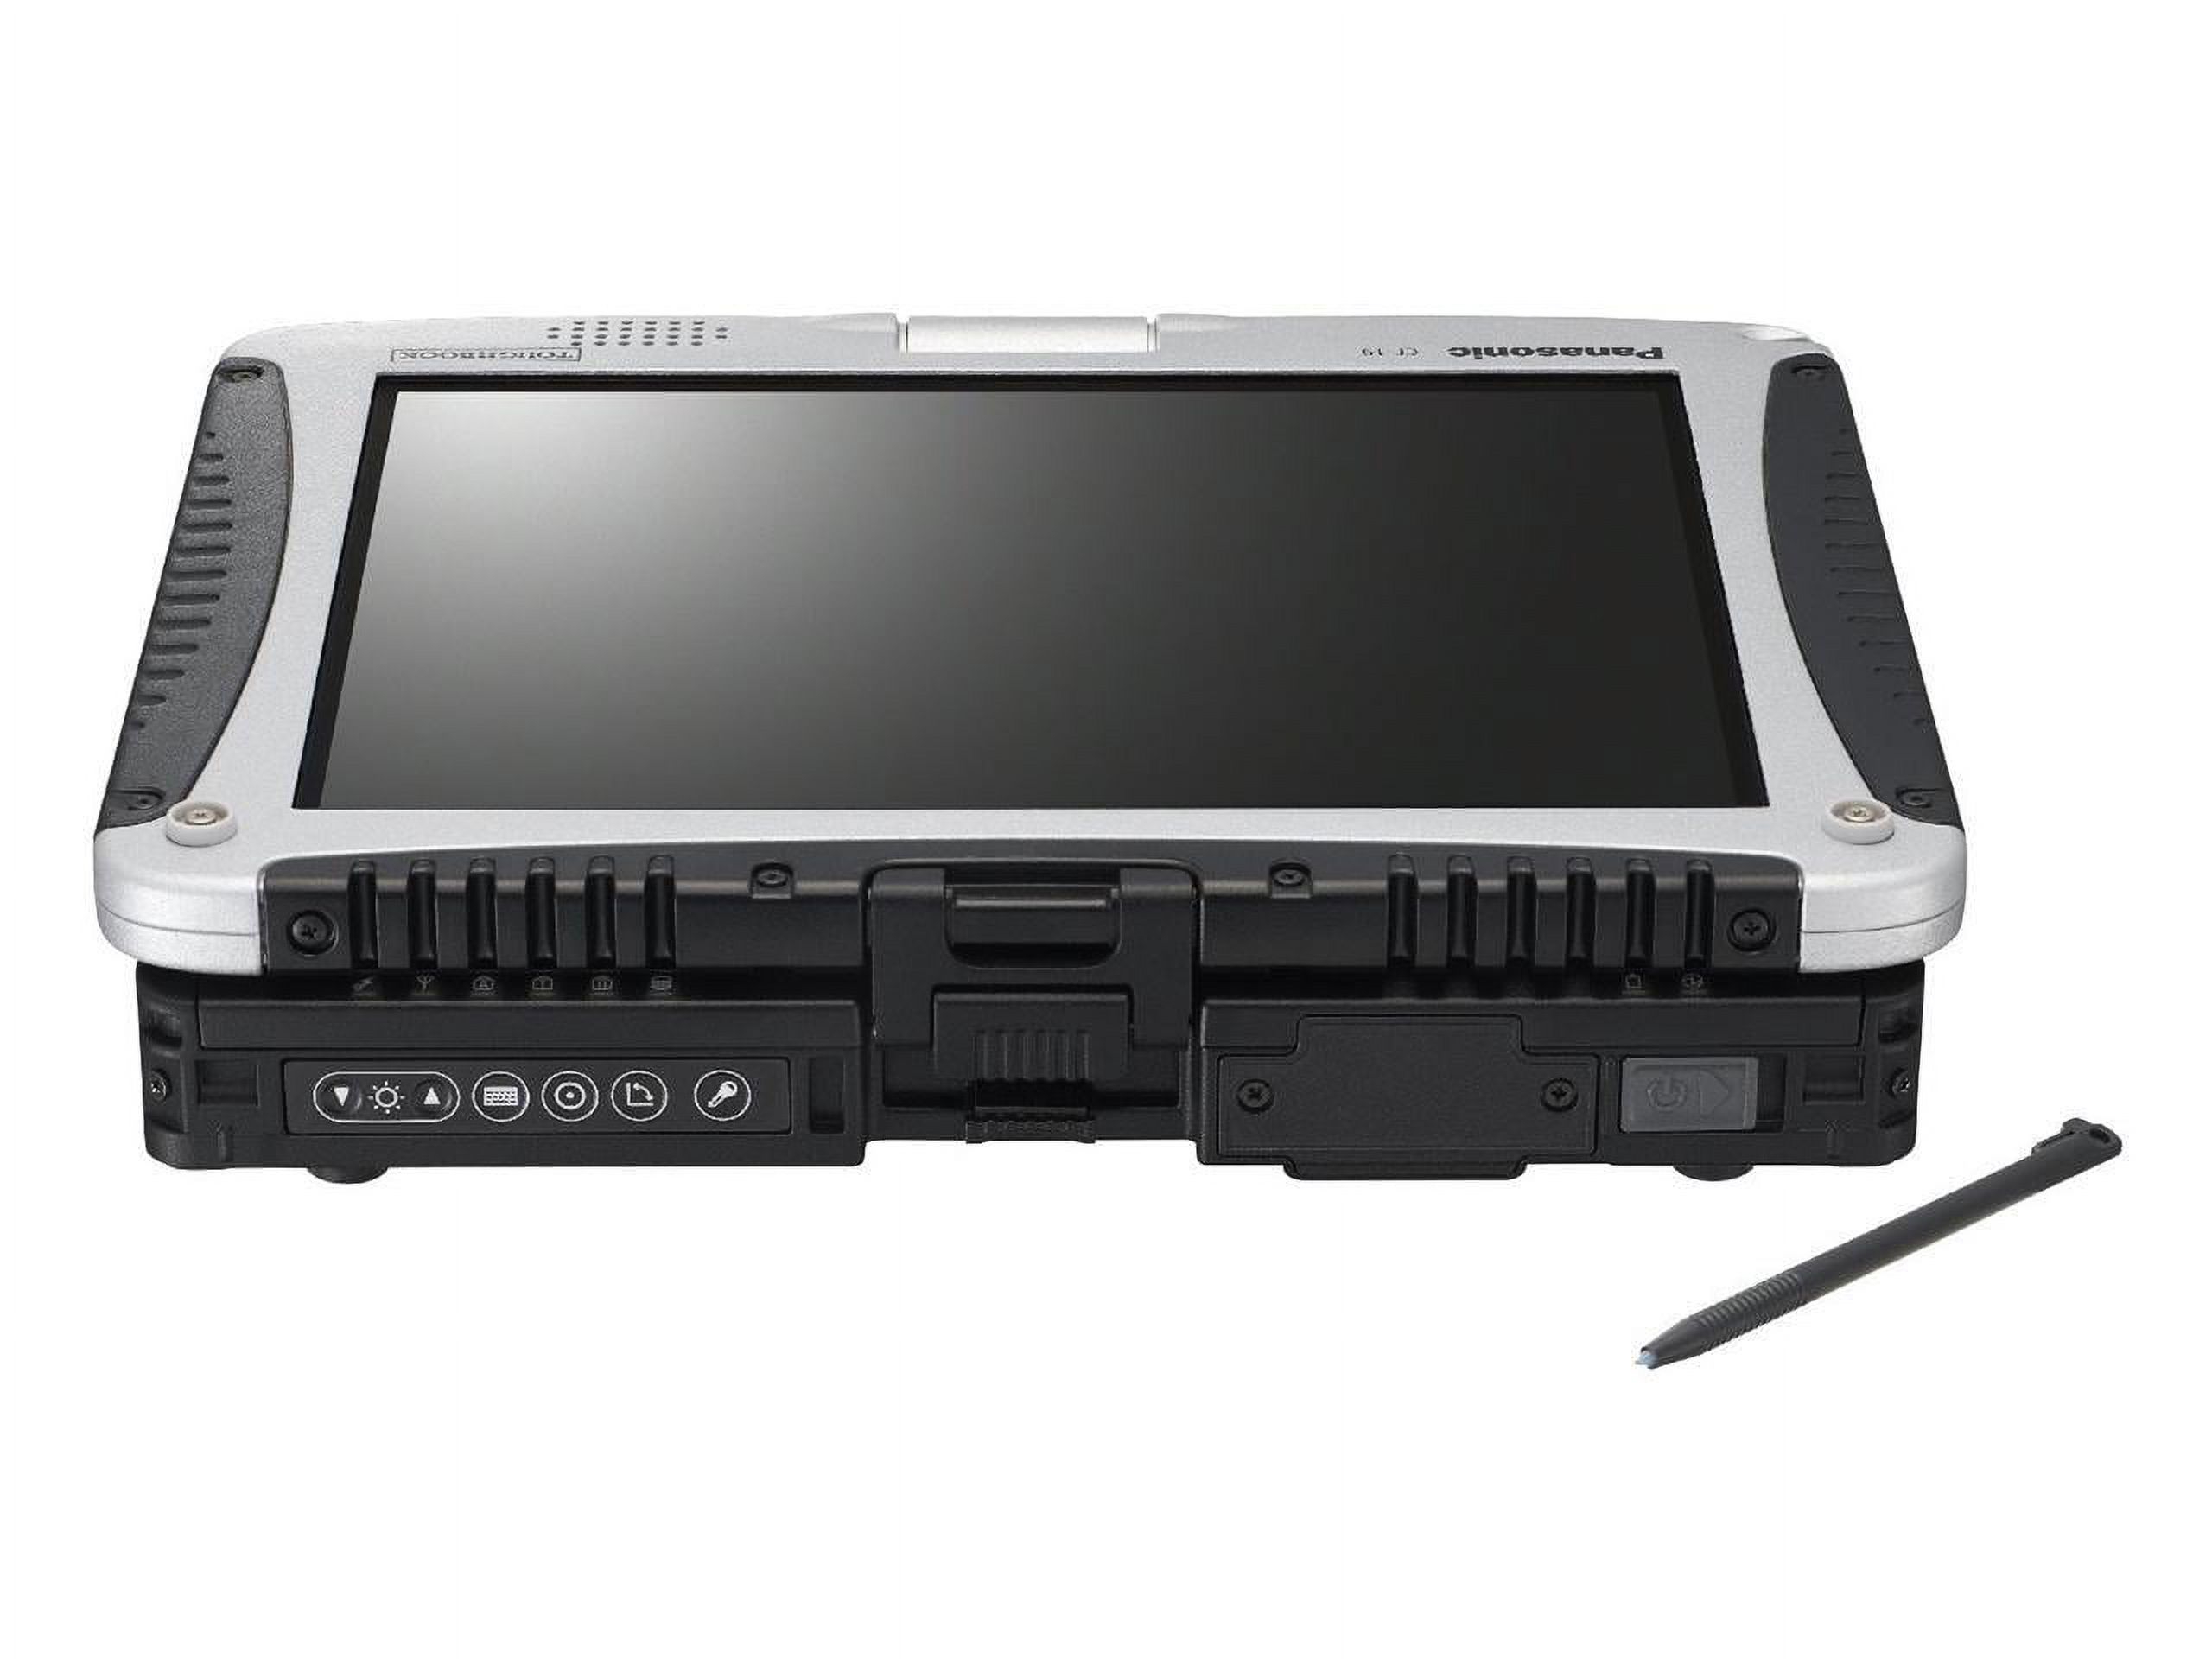 Panasonic Toughbook CF-19 Touchscreen 1.20GHz U9300 C2D 500GB HDD 4GB Ram Windows 7 professional -USED with FREE 3 Year Warranty provided by CPS. - image 1 of 2